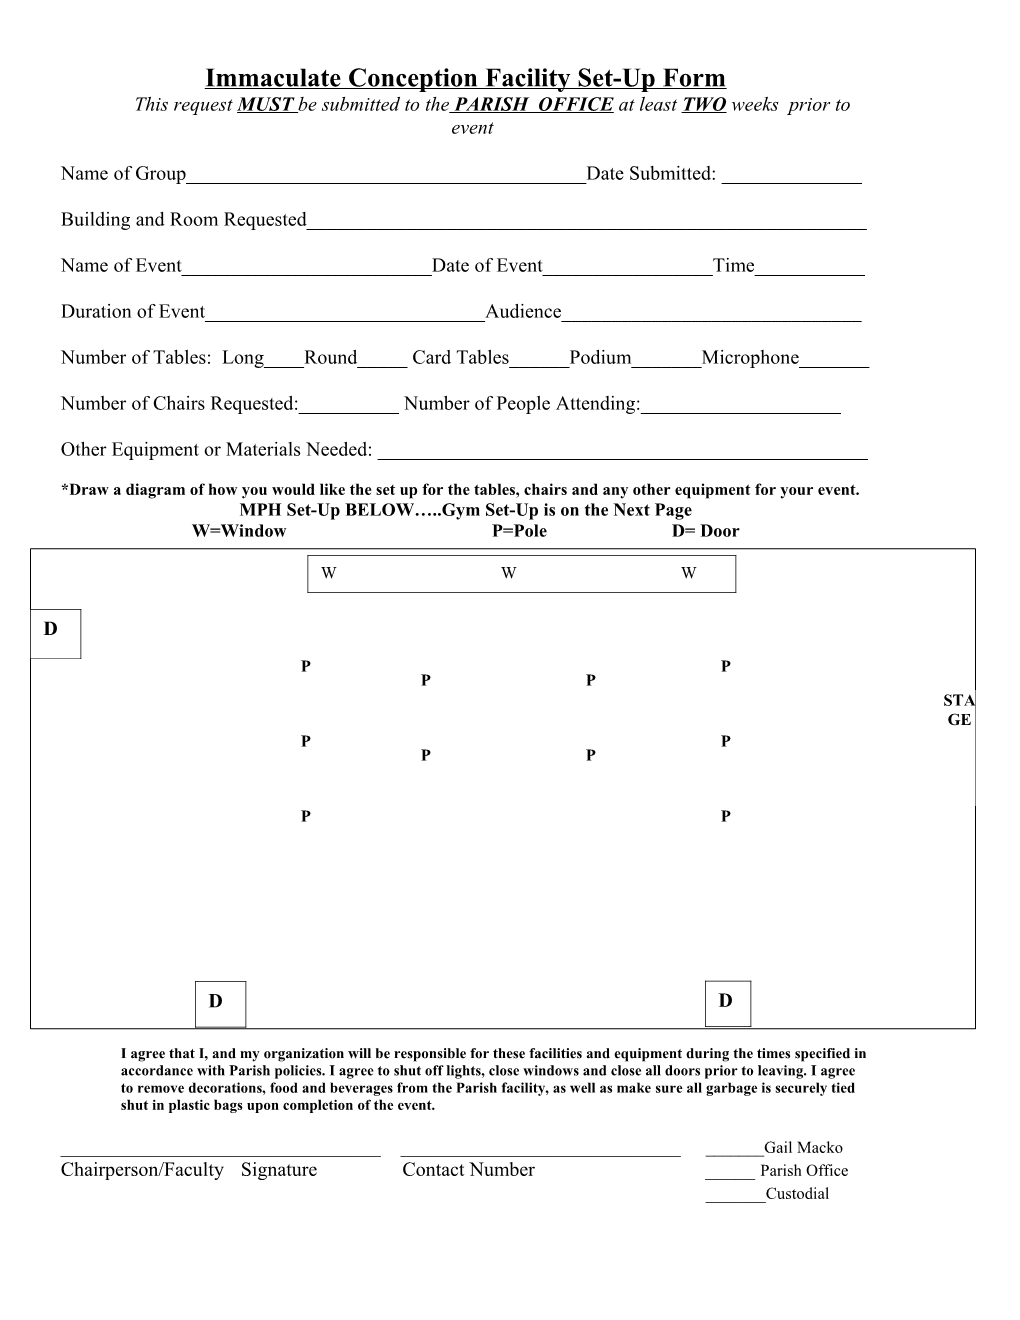 Immaculate Conception Grade School Facility Set-Up Form